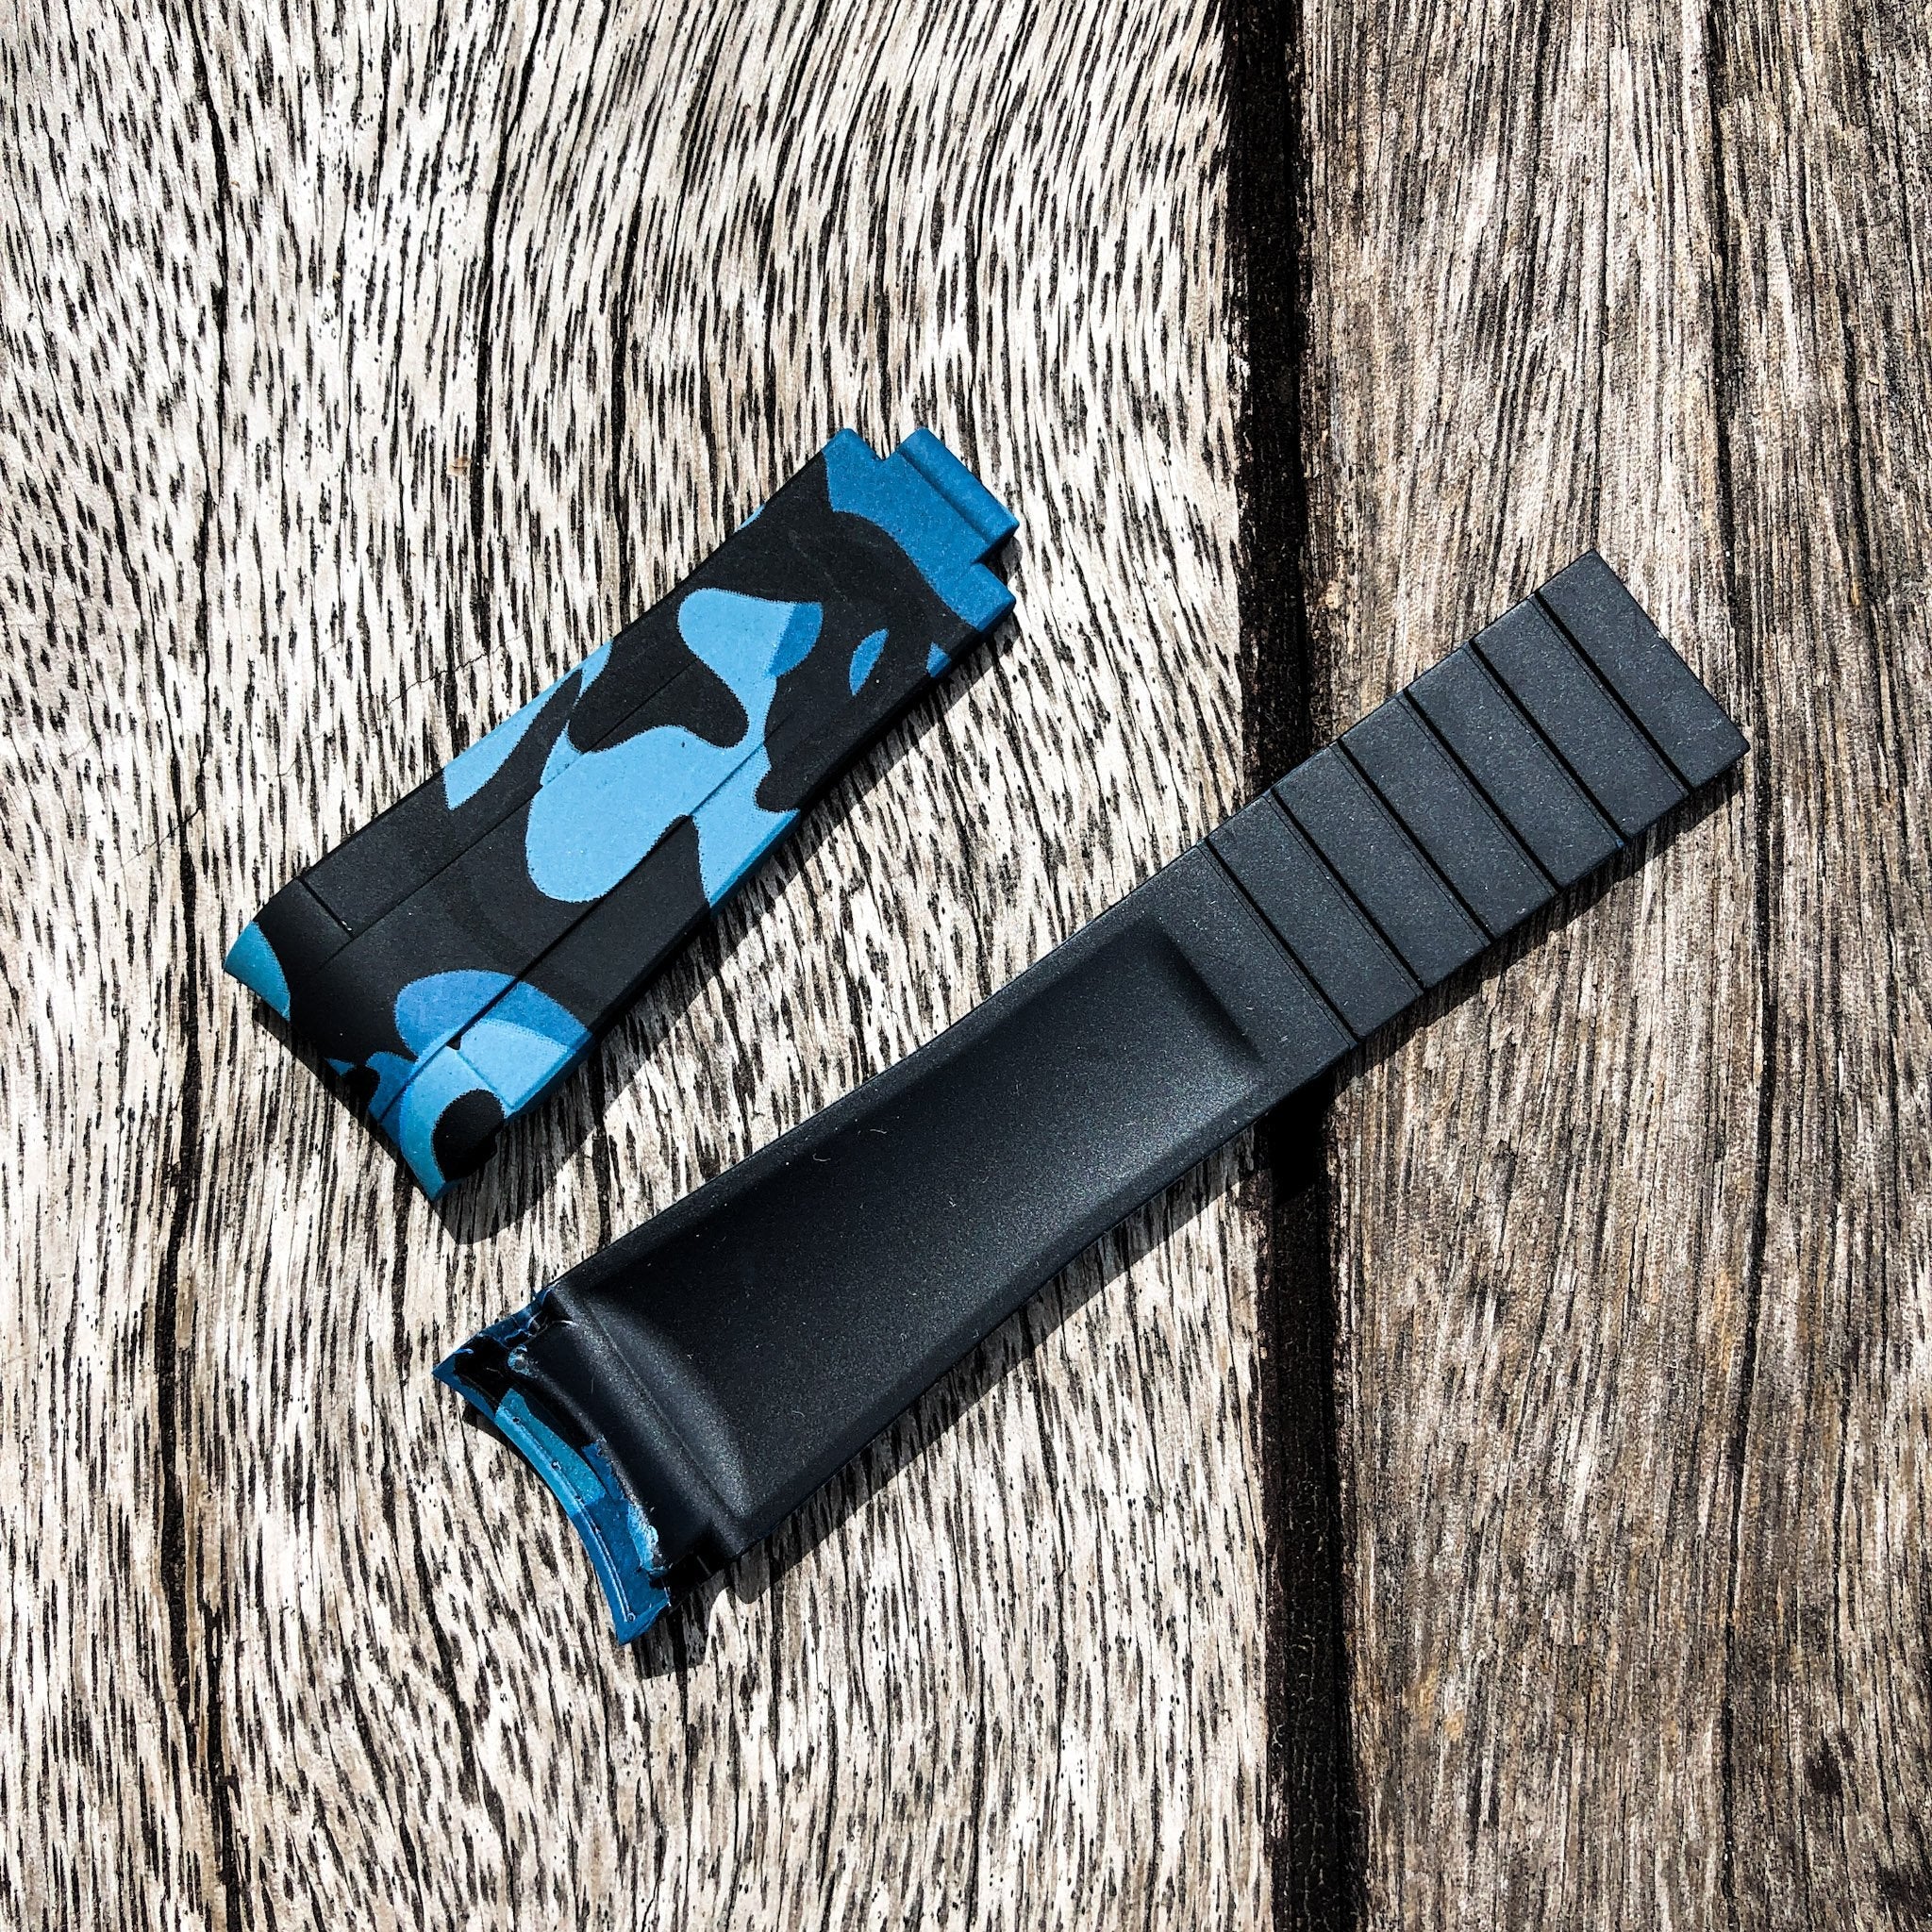 Aqua Series | Blue Camouflage Rubber Watch Strap For Rolex with Curved End - Samurai Vintage Co.